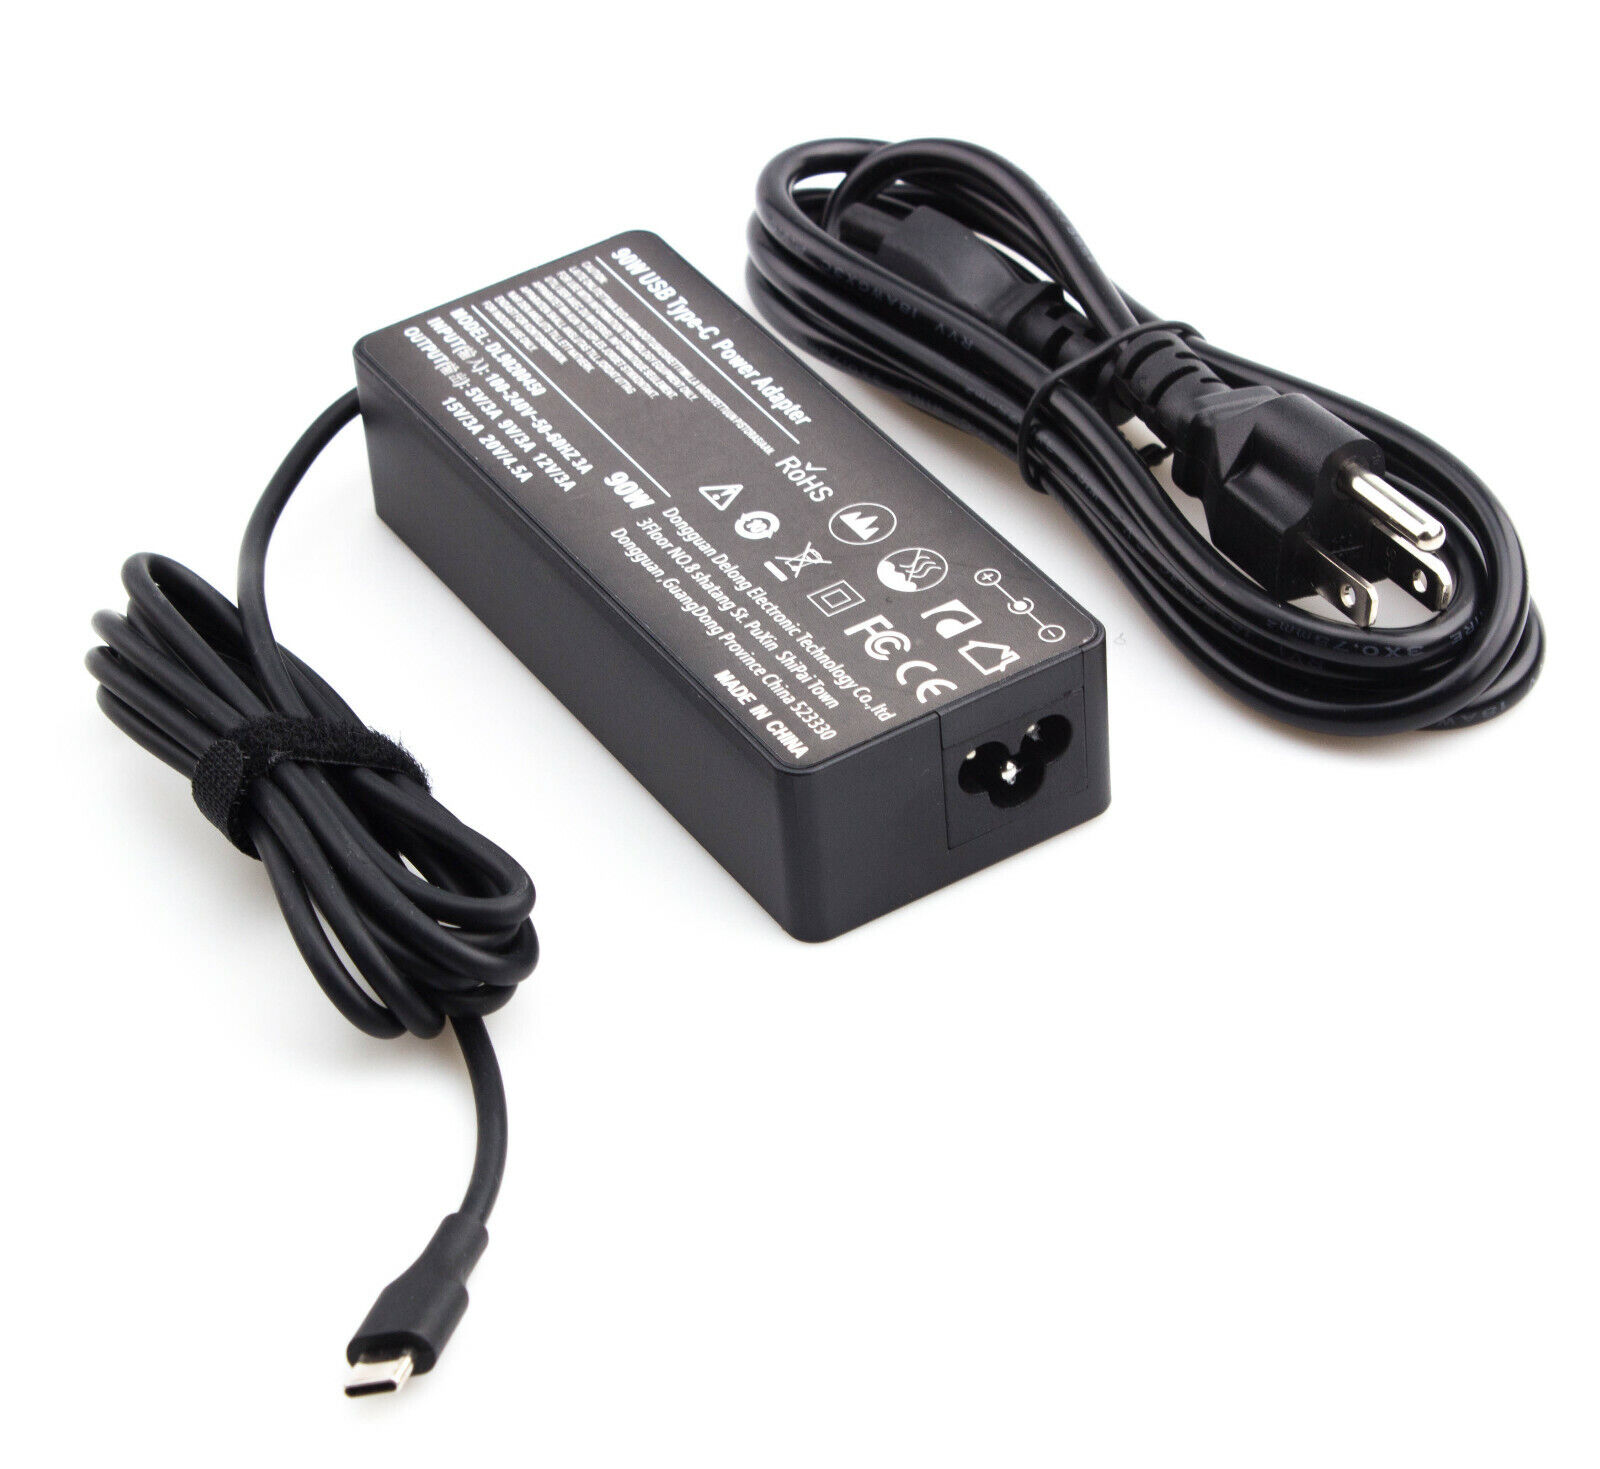 New 90W 65W Laptop Charger USB Type C Chromebook for HP Dell Lenovo Acer Samsung